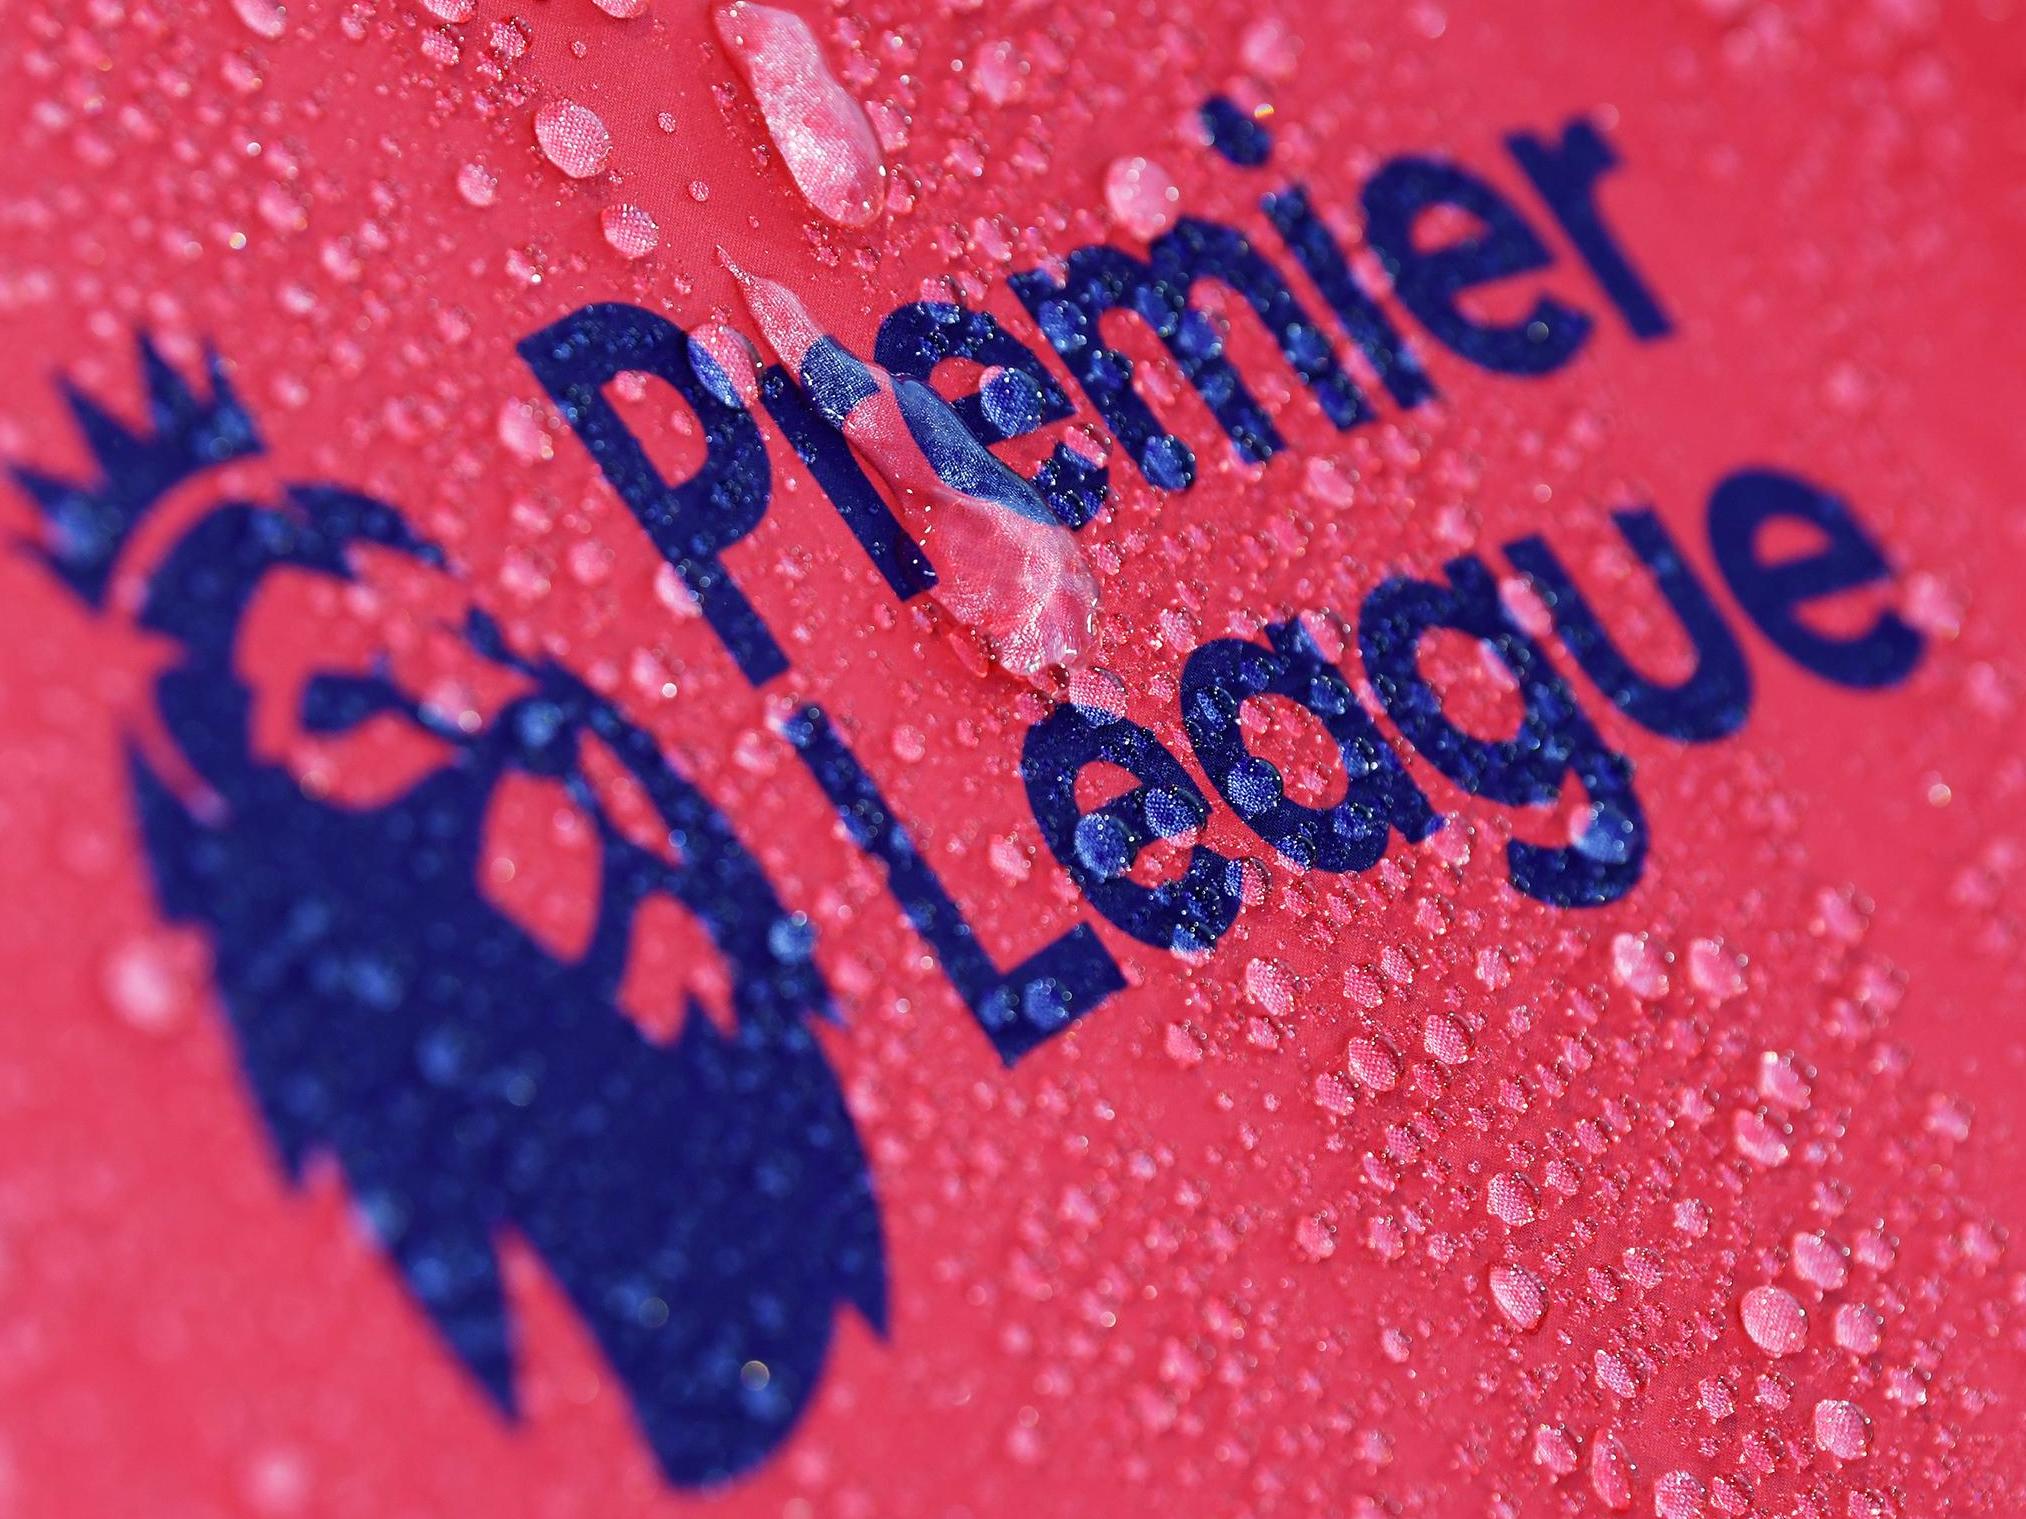 For the last four consecutive seasons, Premier League crowds have reached record levels with 96 per cent of tickets sold